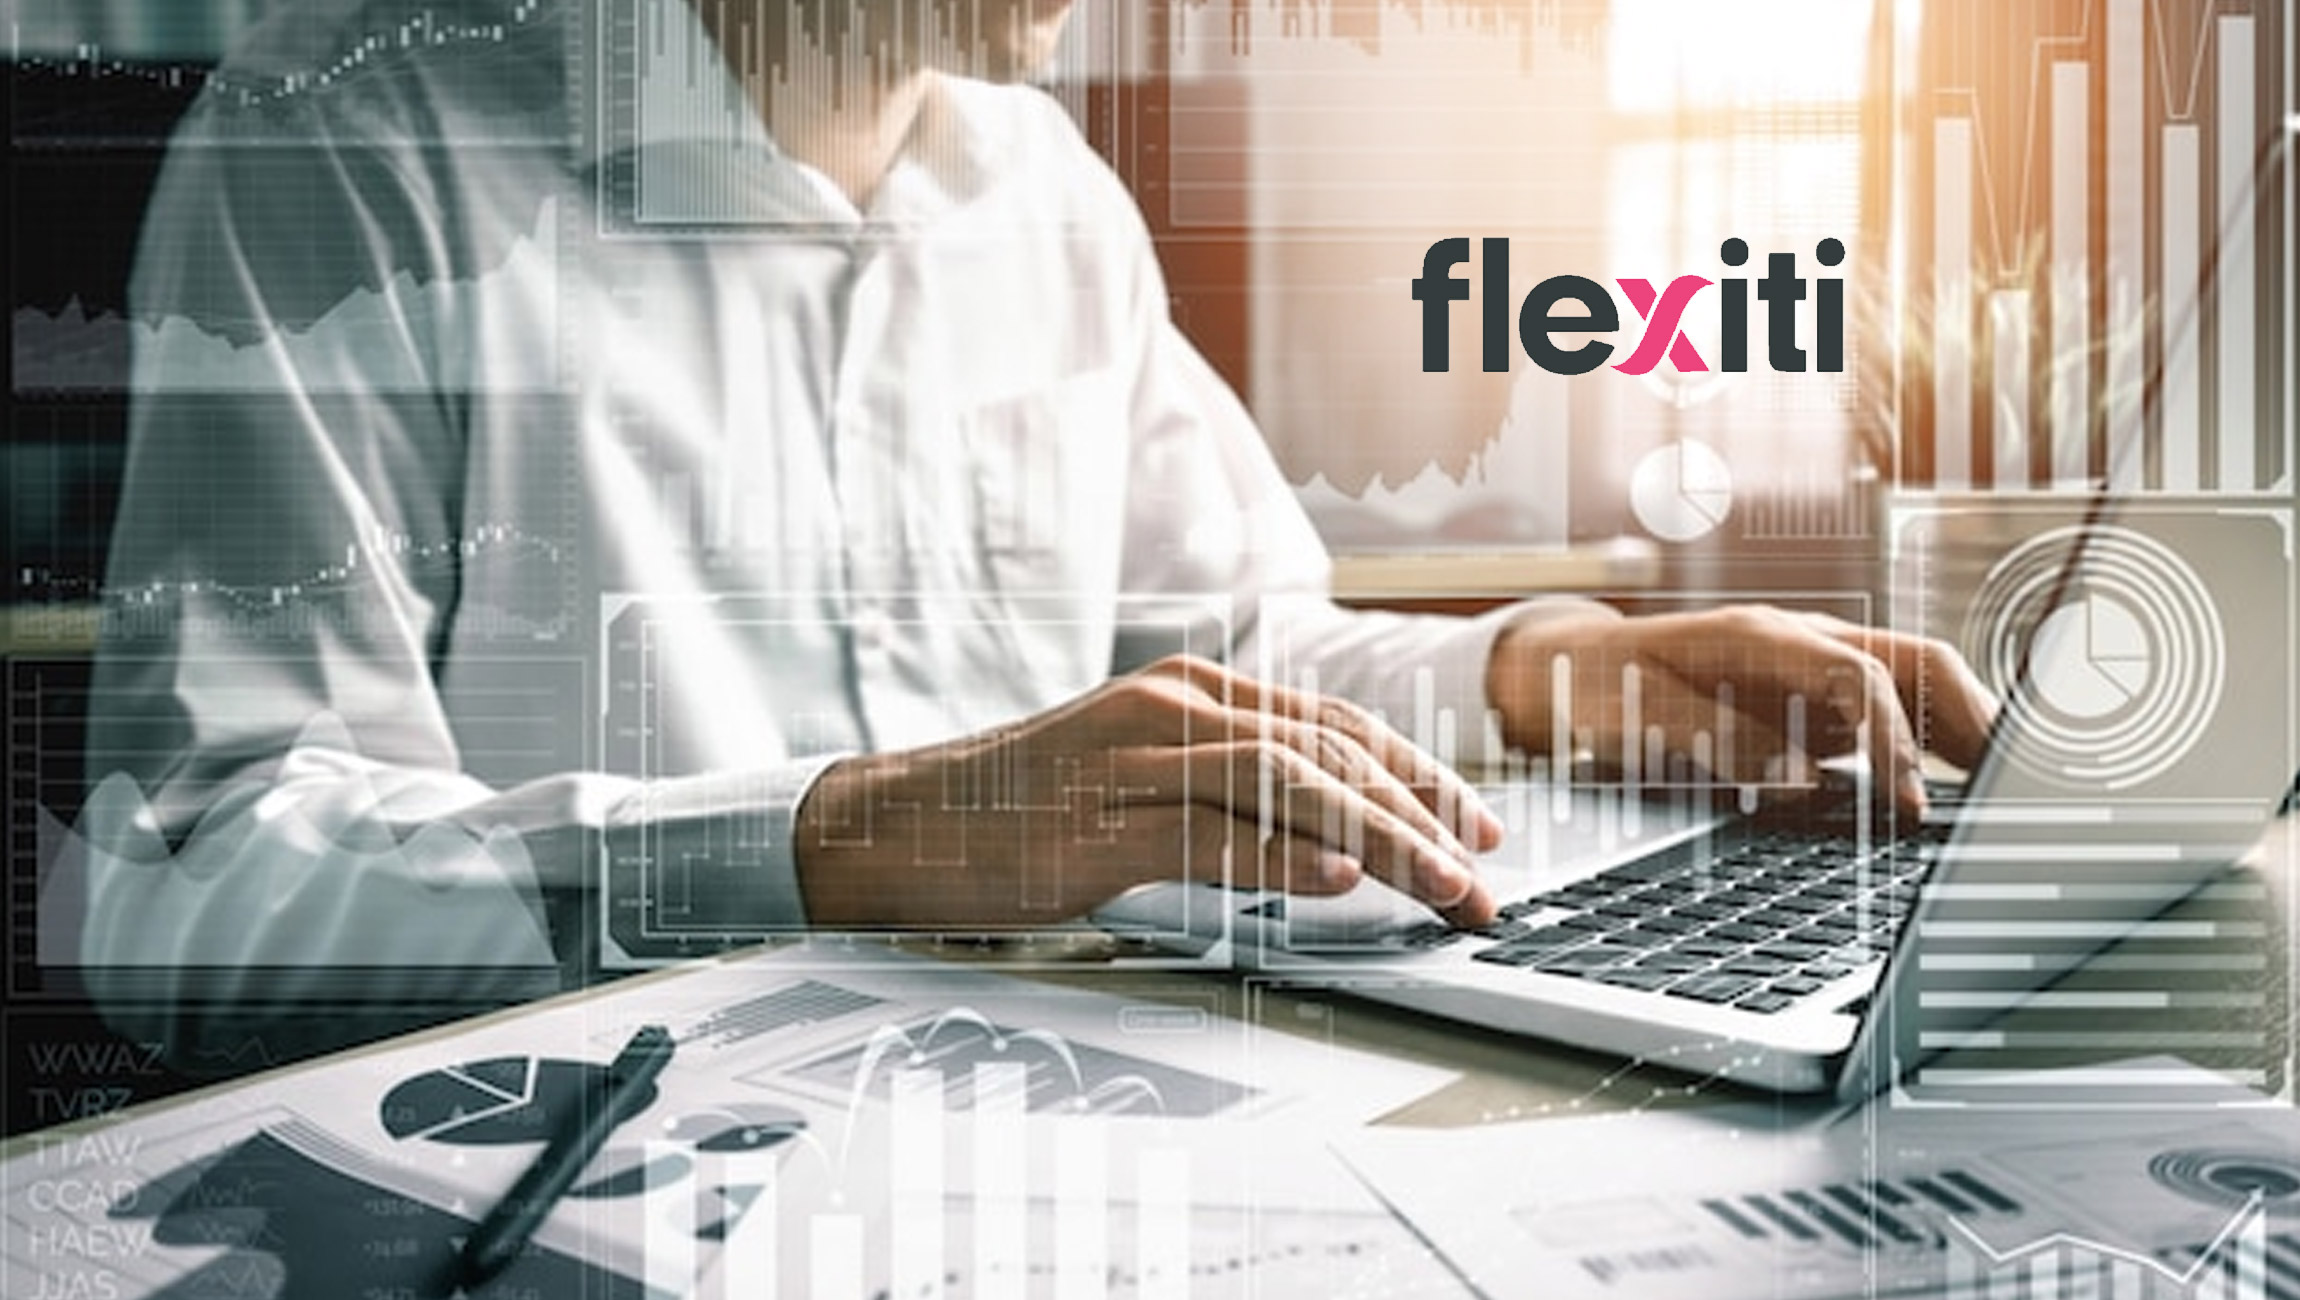 Flexiti Named as One of Canada’s Top Growing Companies by The Globe and Mail